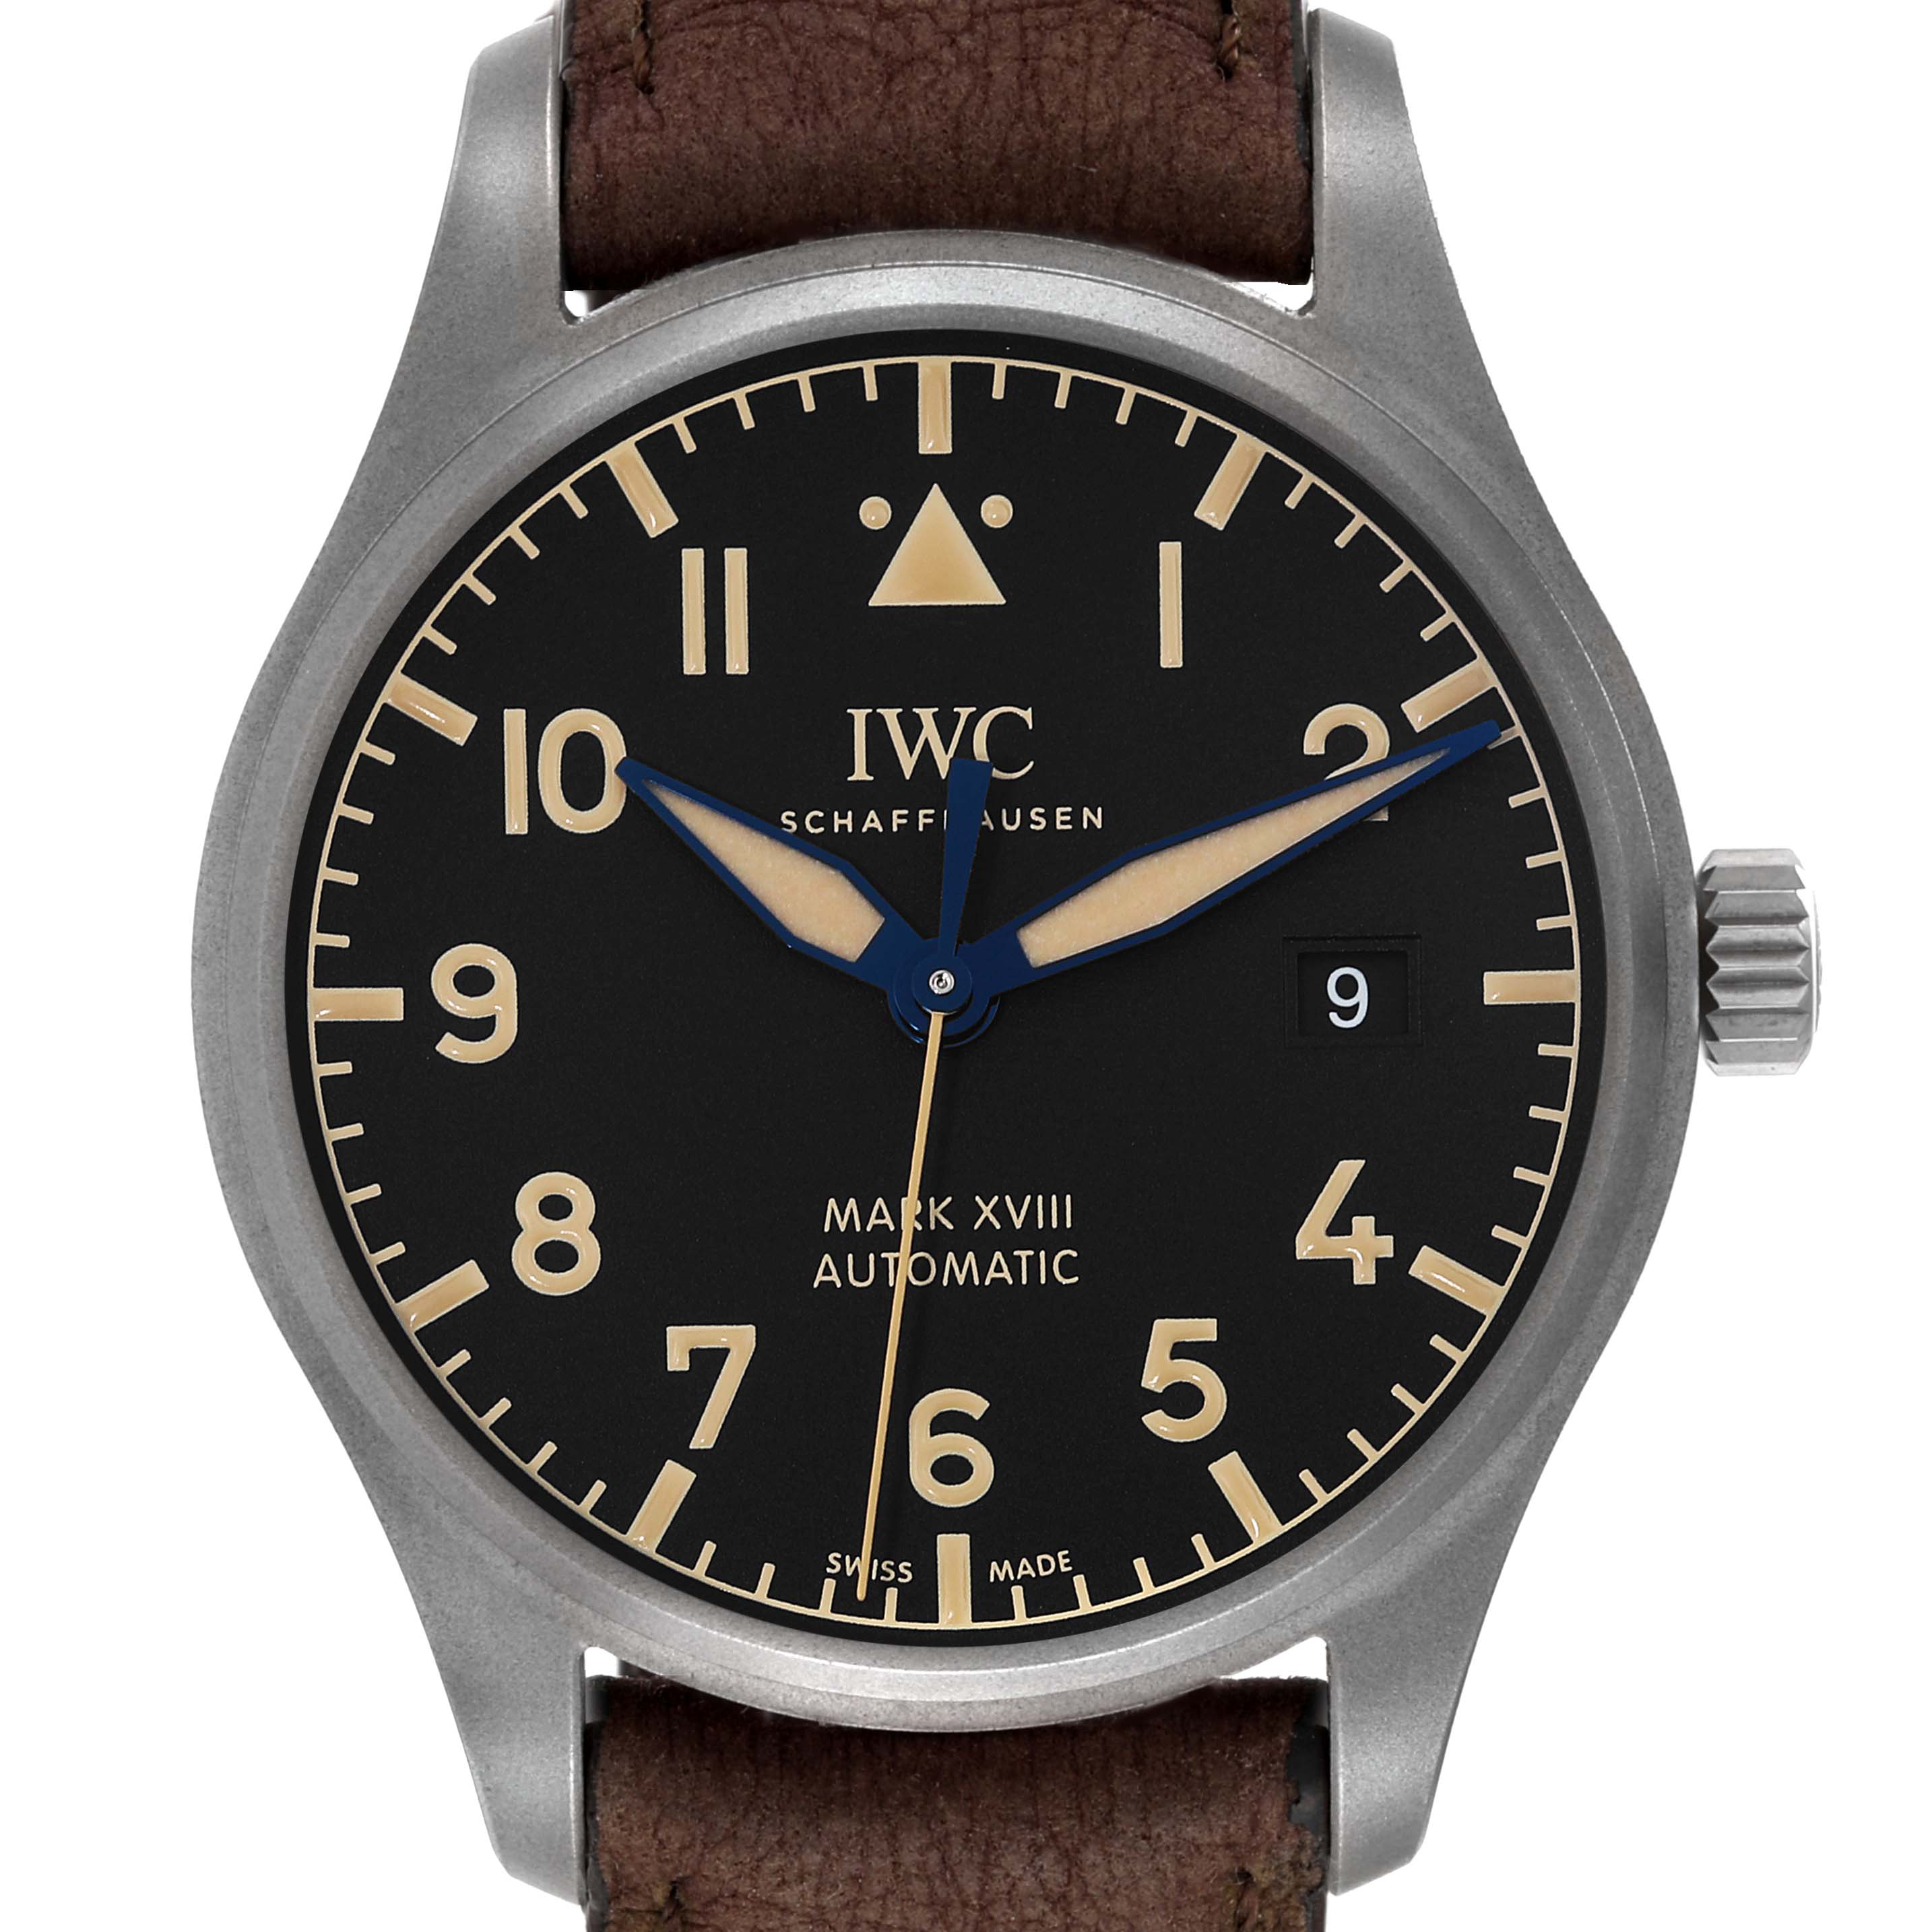 Introducing - IWC Pilot's Watch Chronograph Edition Racing Green IW377726  (Specs & Price)